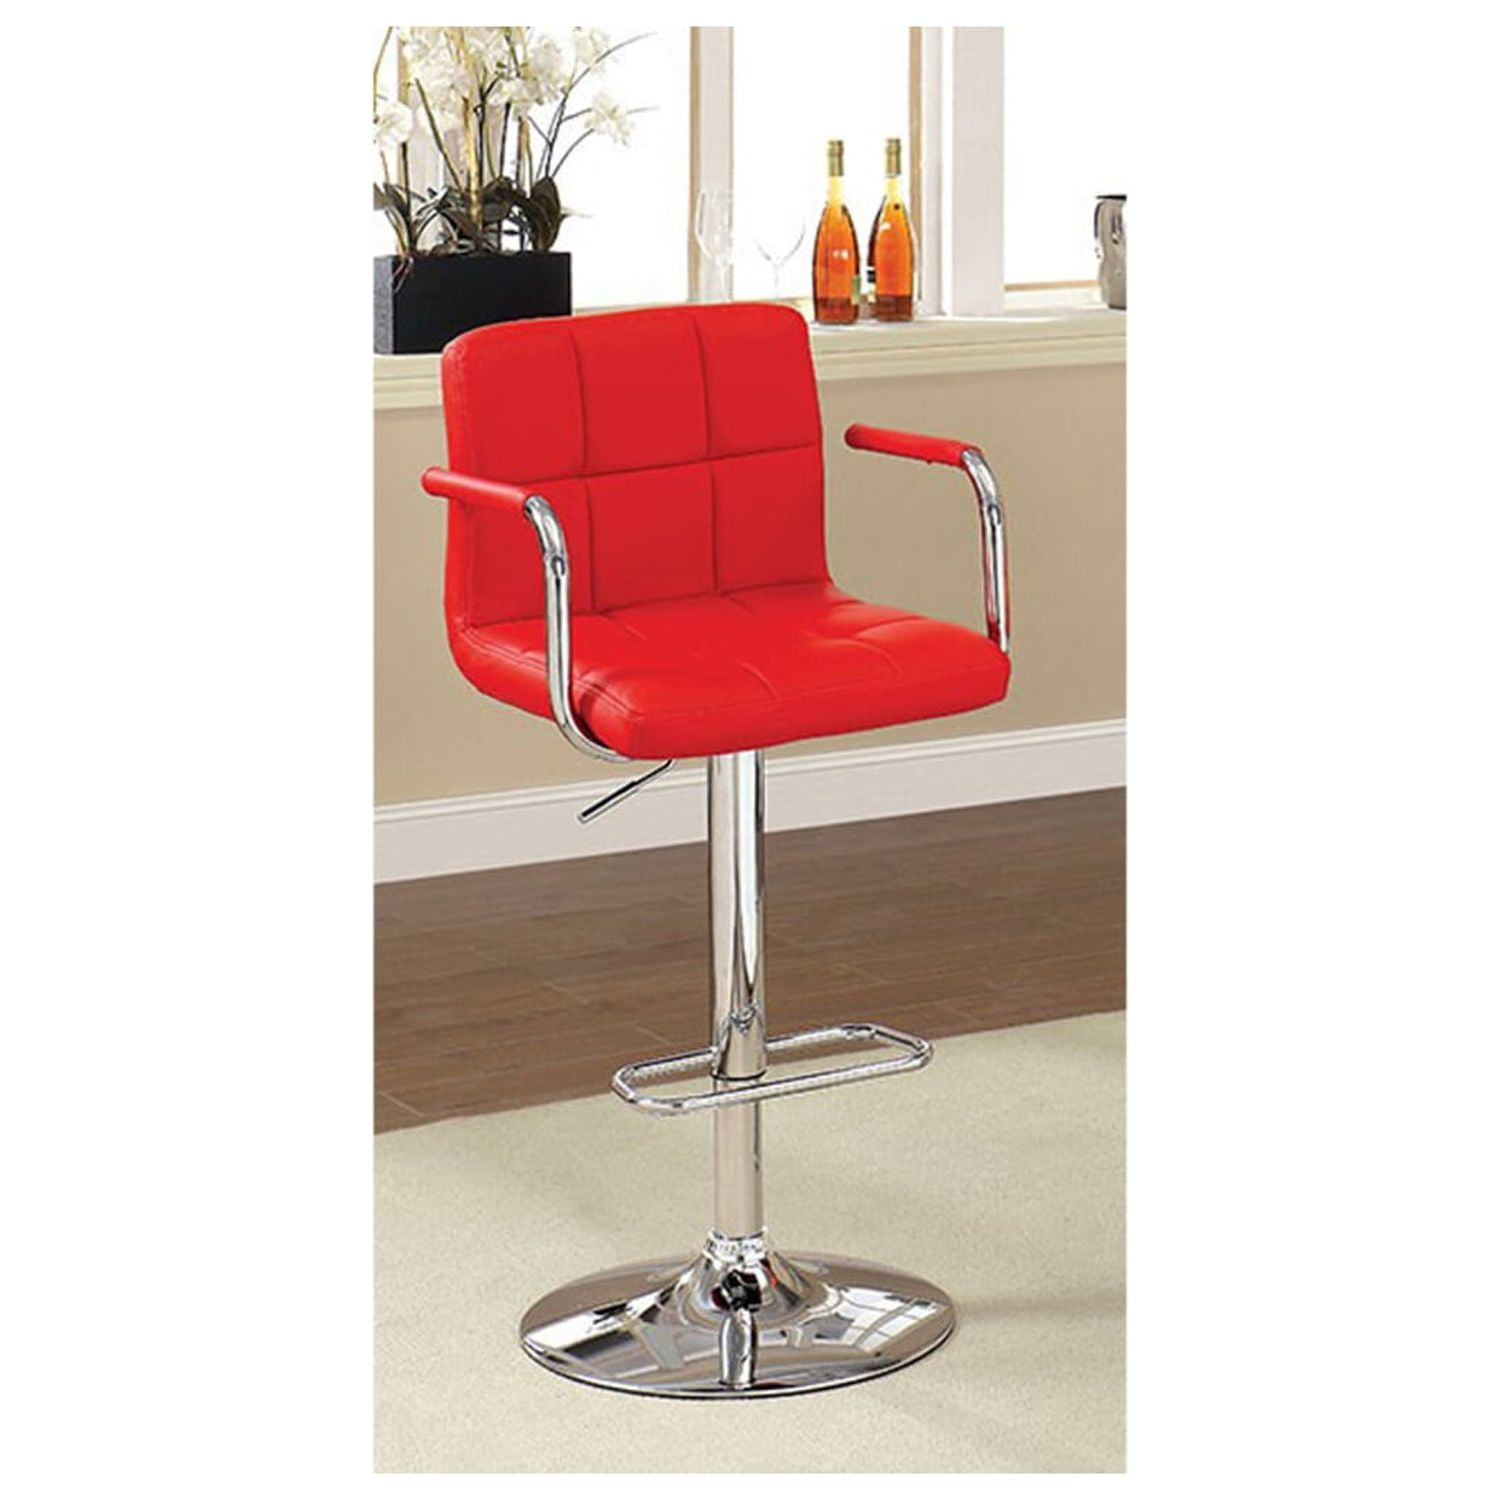 Picture of Benzara BM131409 Corfu Contemporary Bar Stool with Arm in Red Polyurethane